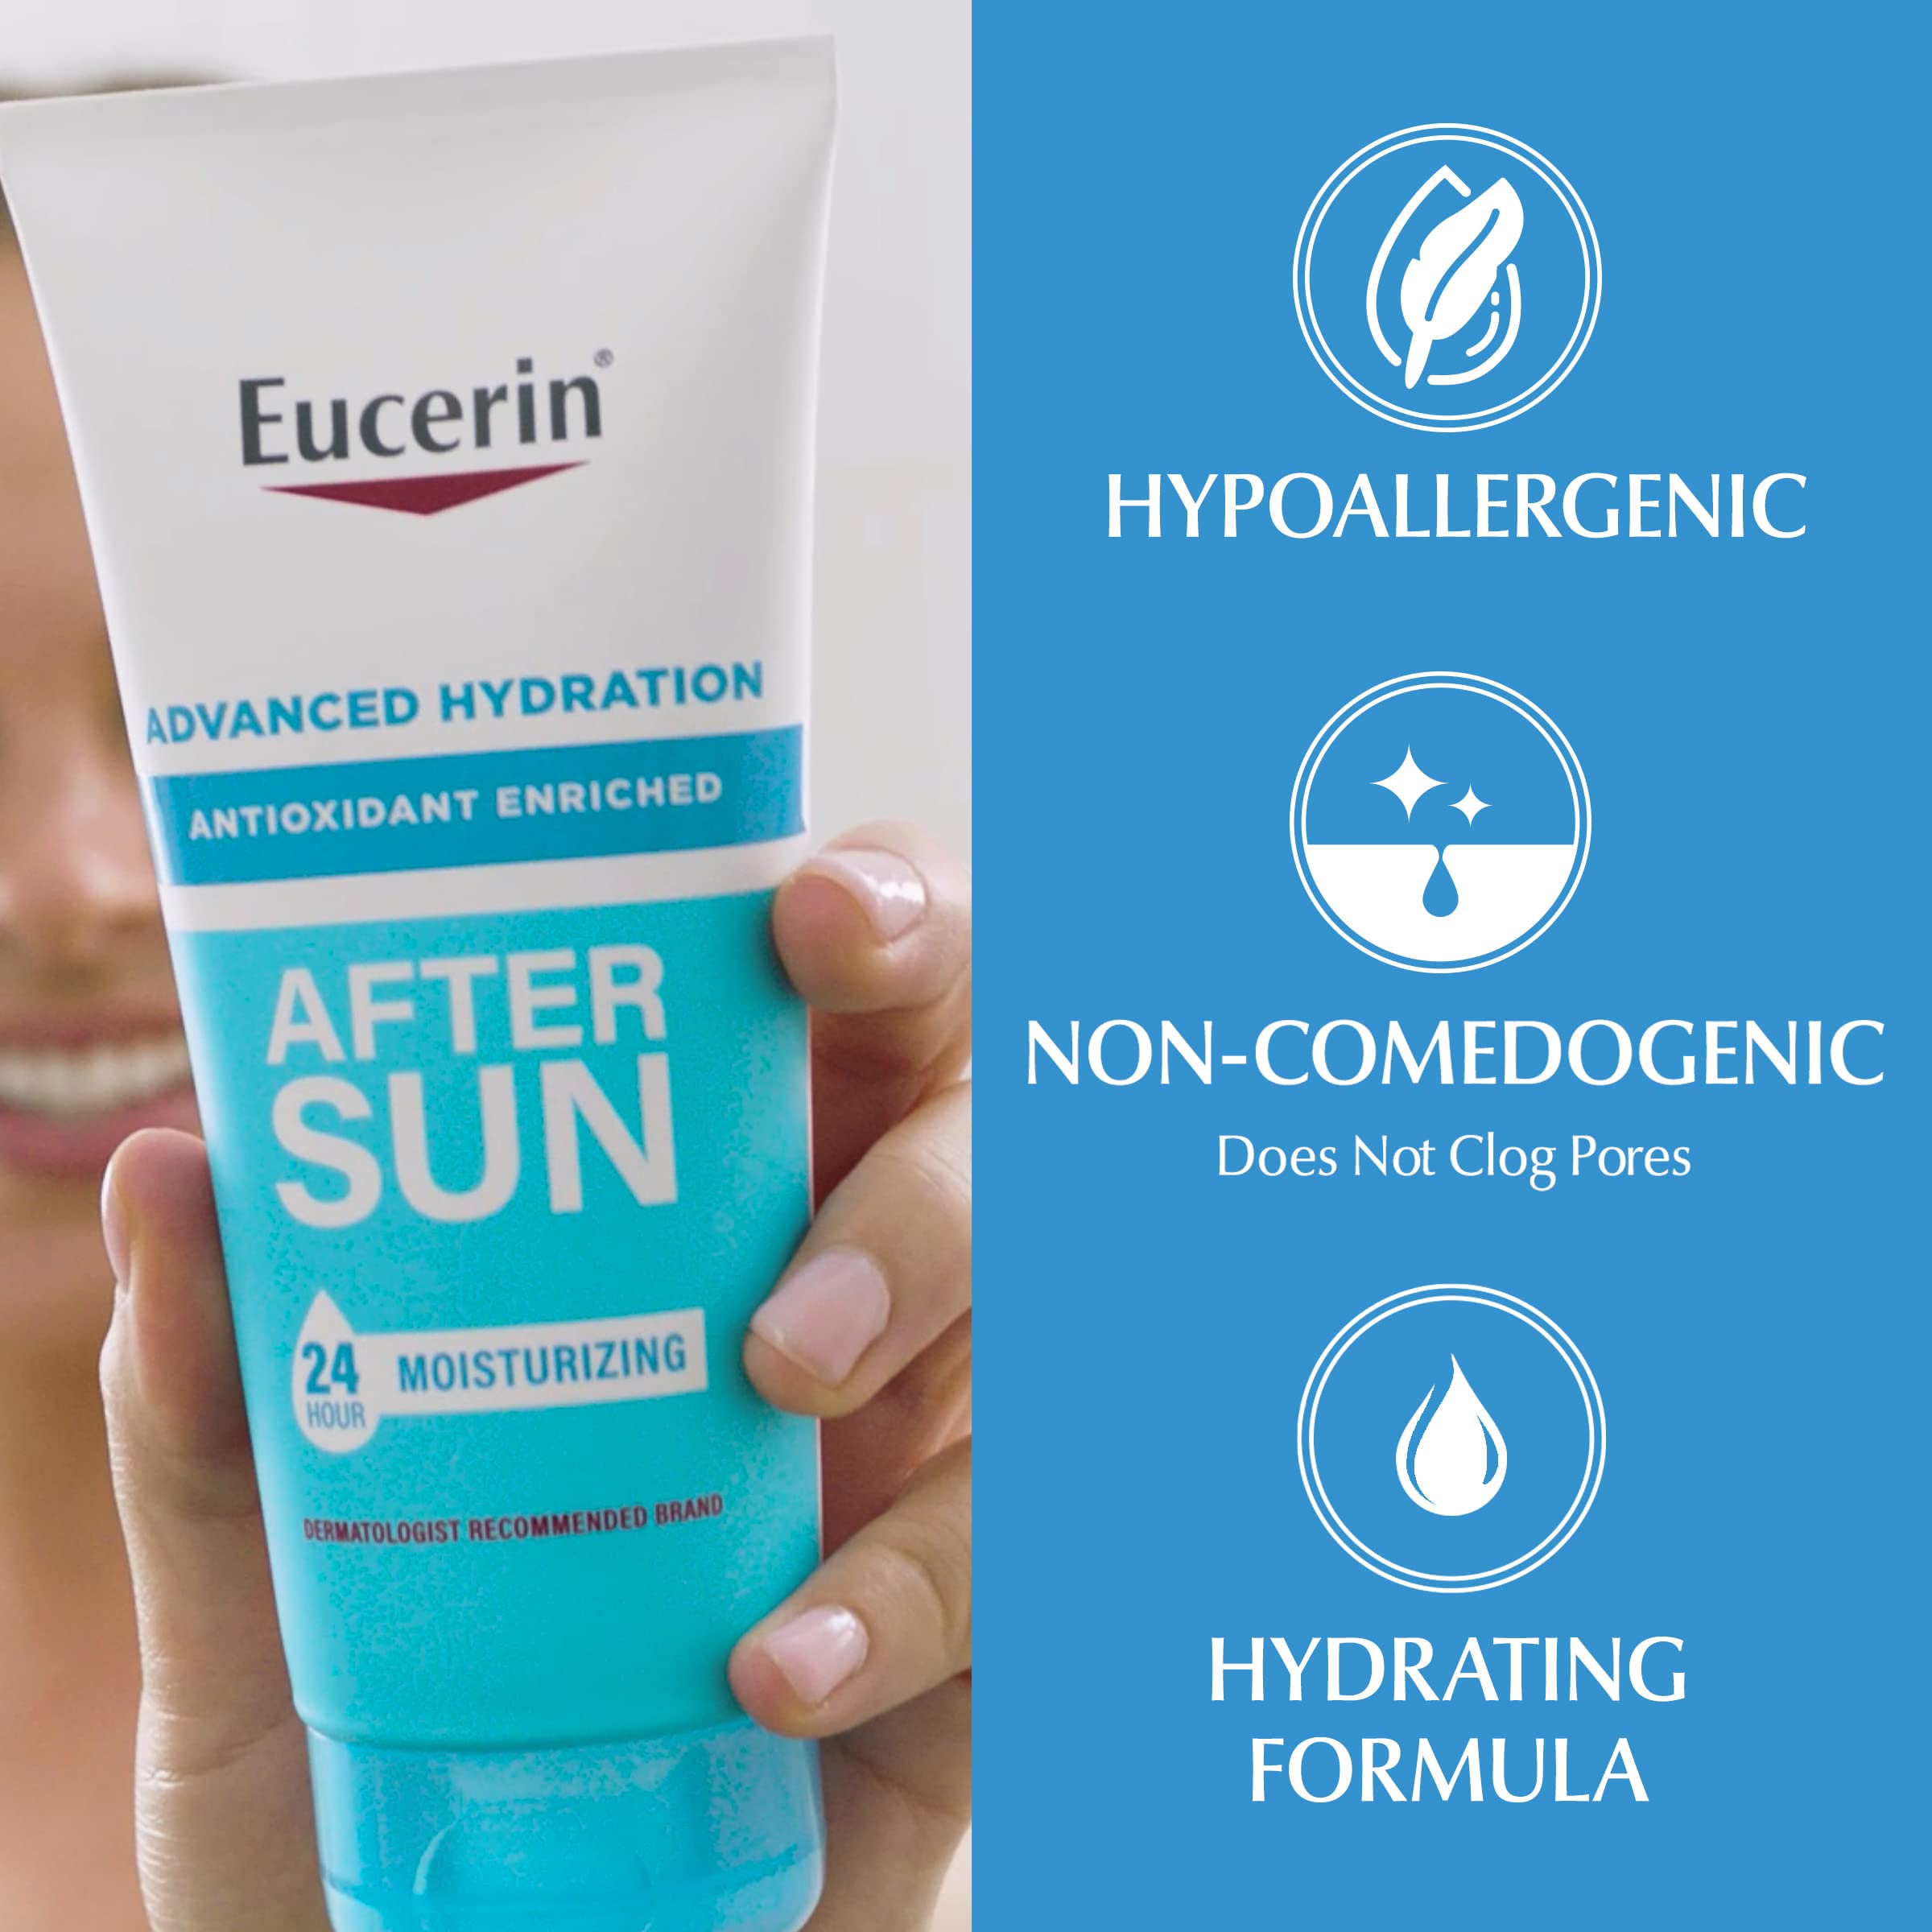 Eucerin Advanced Hydration After Sun Lotion for Face and Body, Enriched with Antioxidants, 24-Hour Hydration for Dry, Sun-Stressed Skin, 6.8 Fl Oz Tube